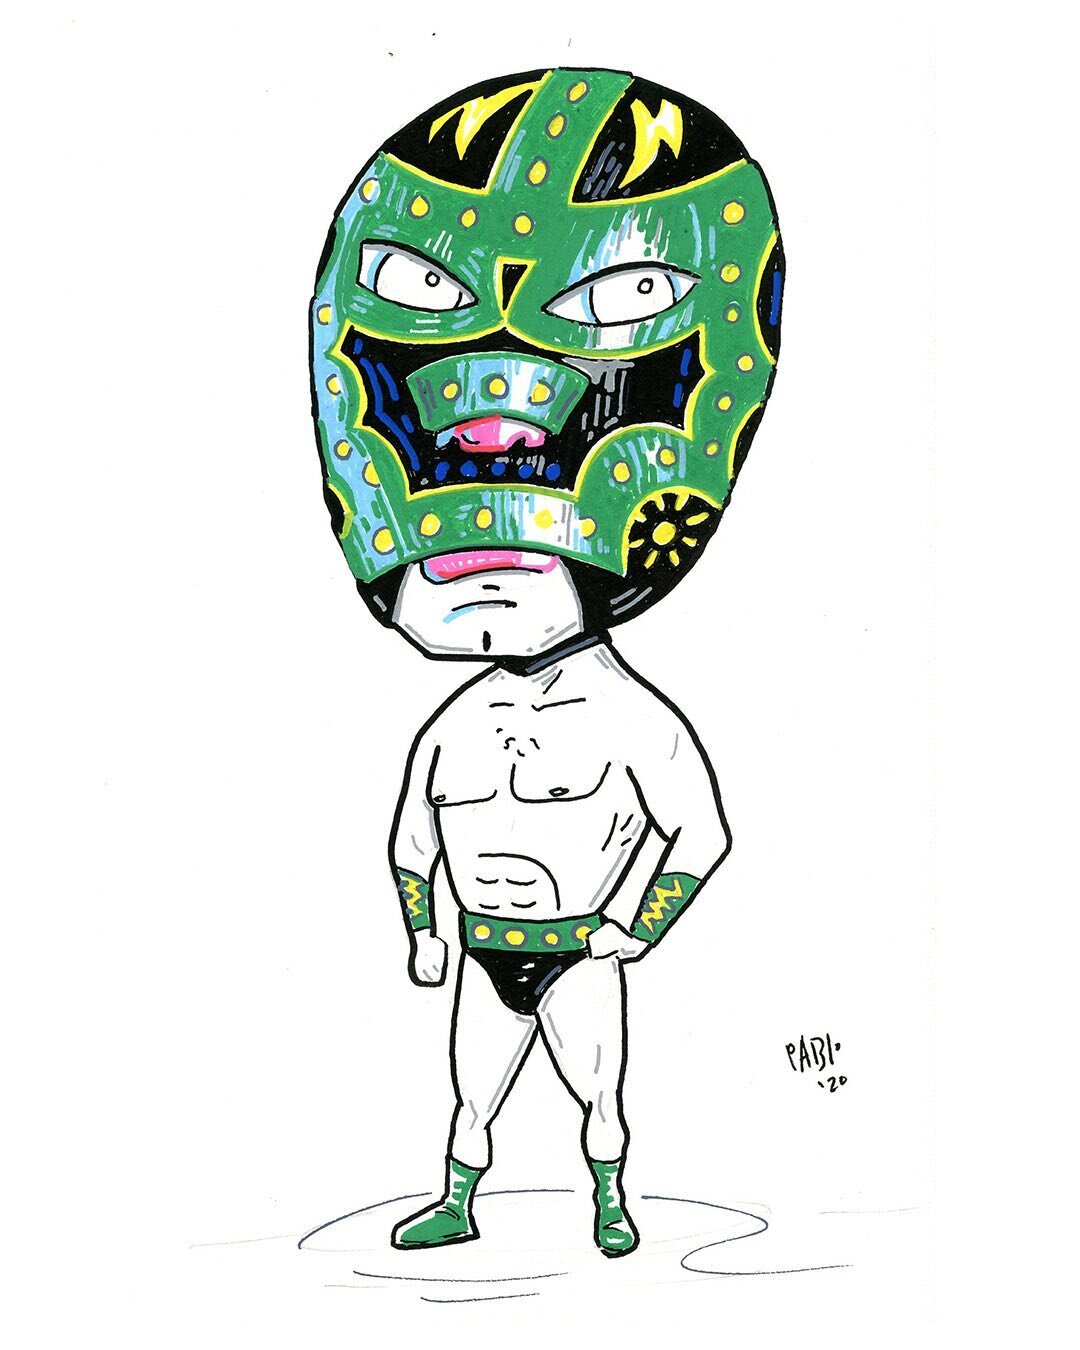 Lucha - The Hornet acrylic pen on paper #luchador #lucha #mexican wrestler #drawing